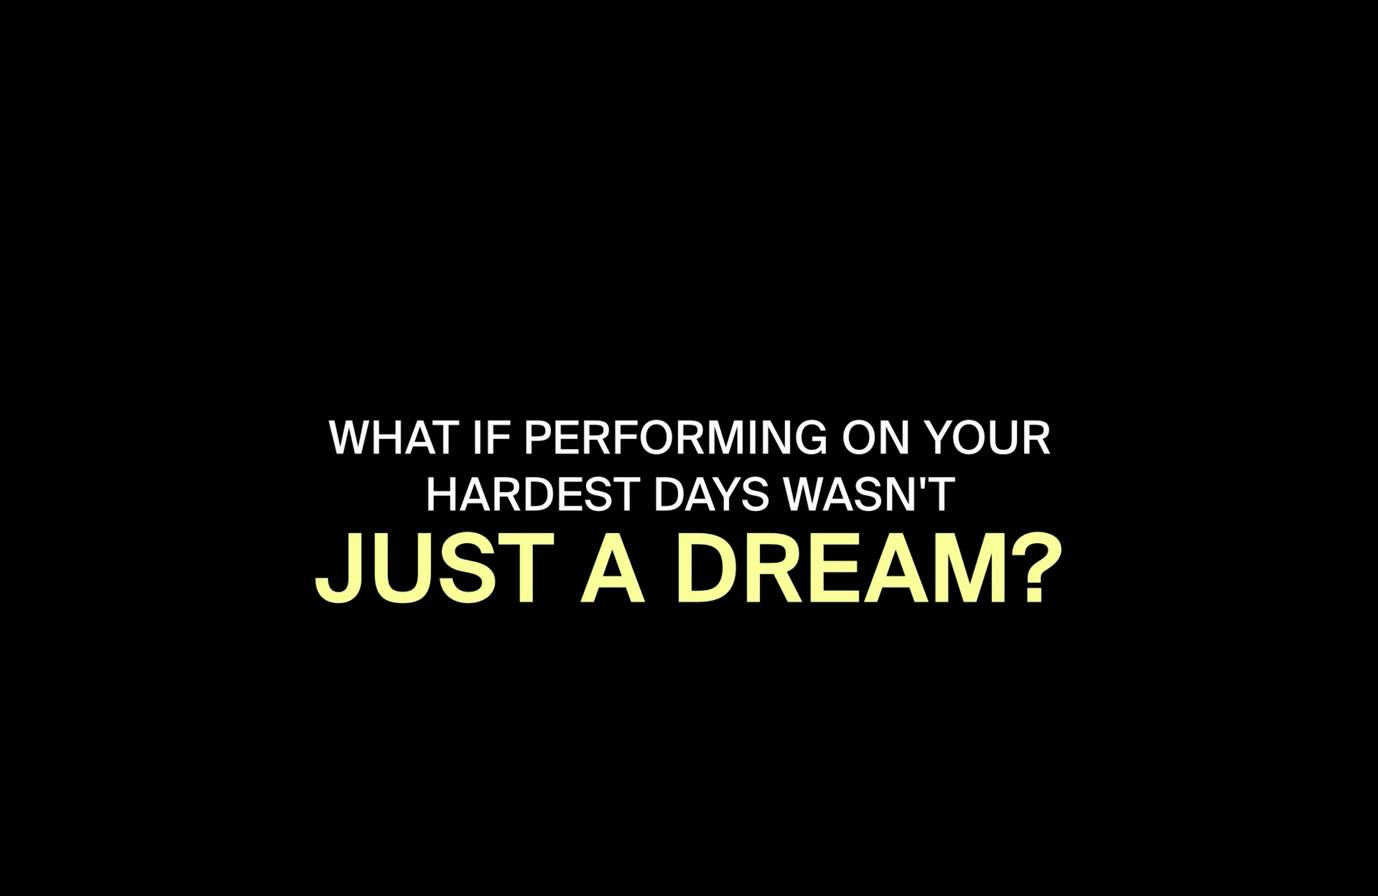 What if performing on your hardest days wasnt just a dream? 